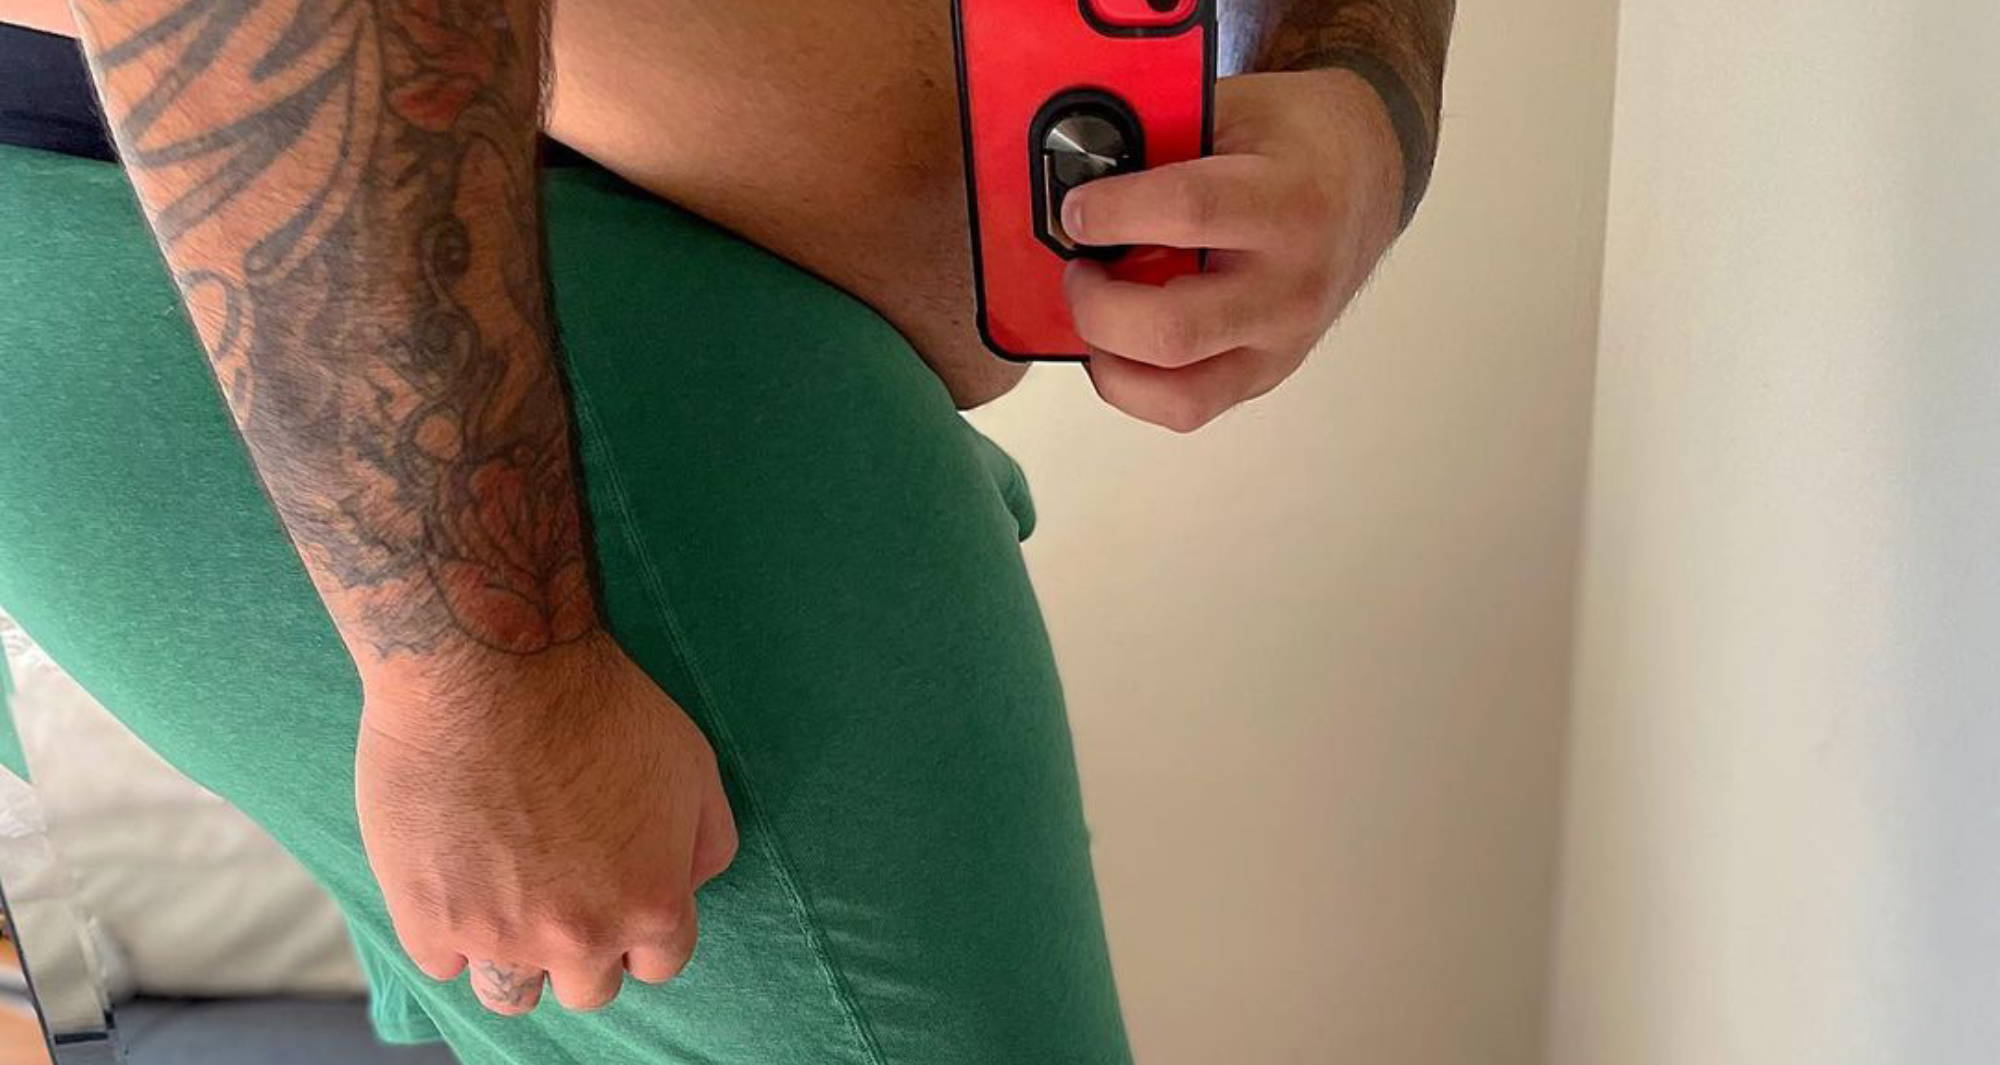  a plus size man wearing green boxers taking a mirror selfie from the side